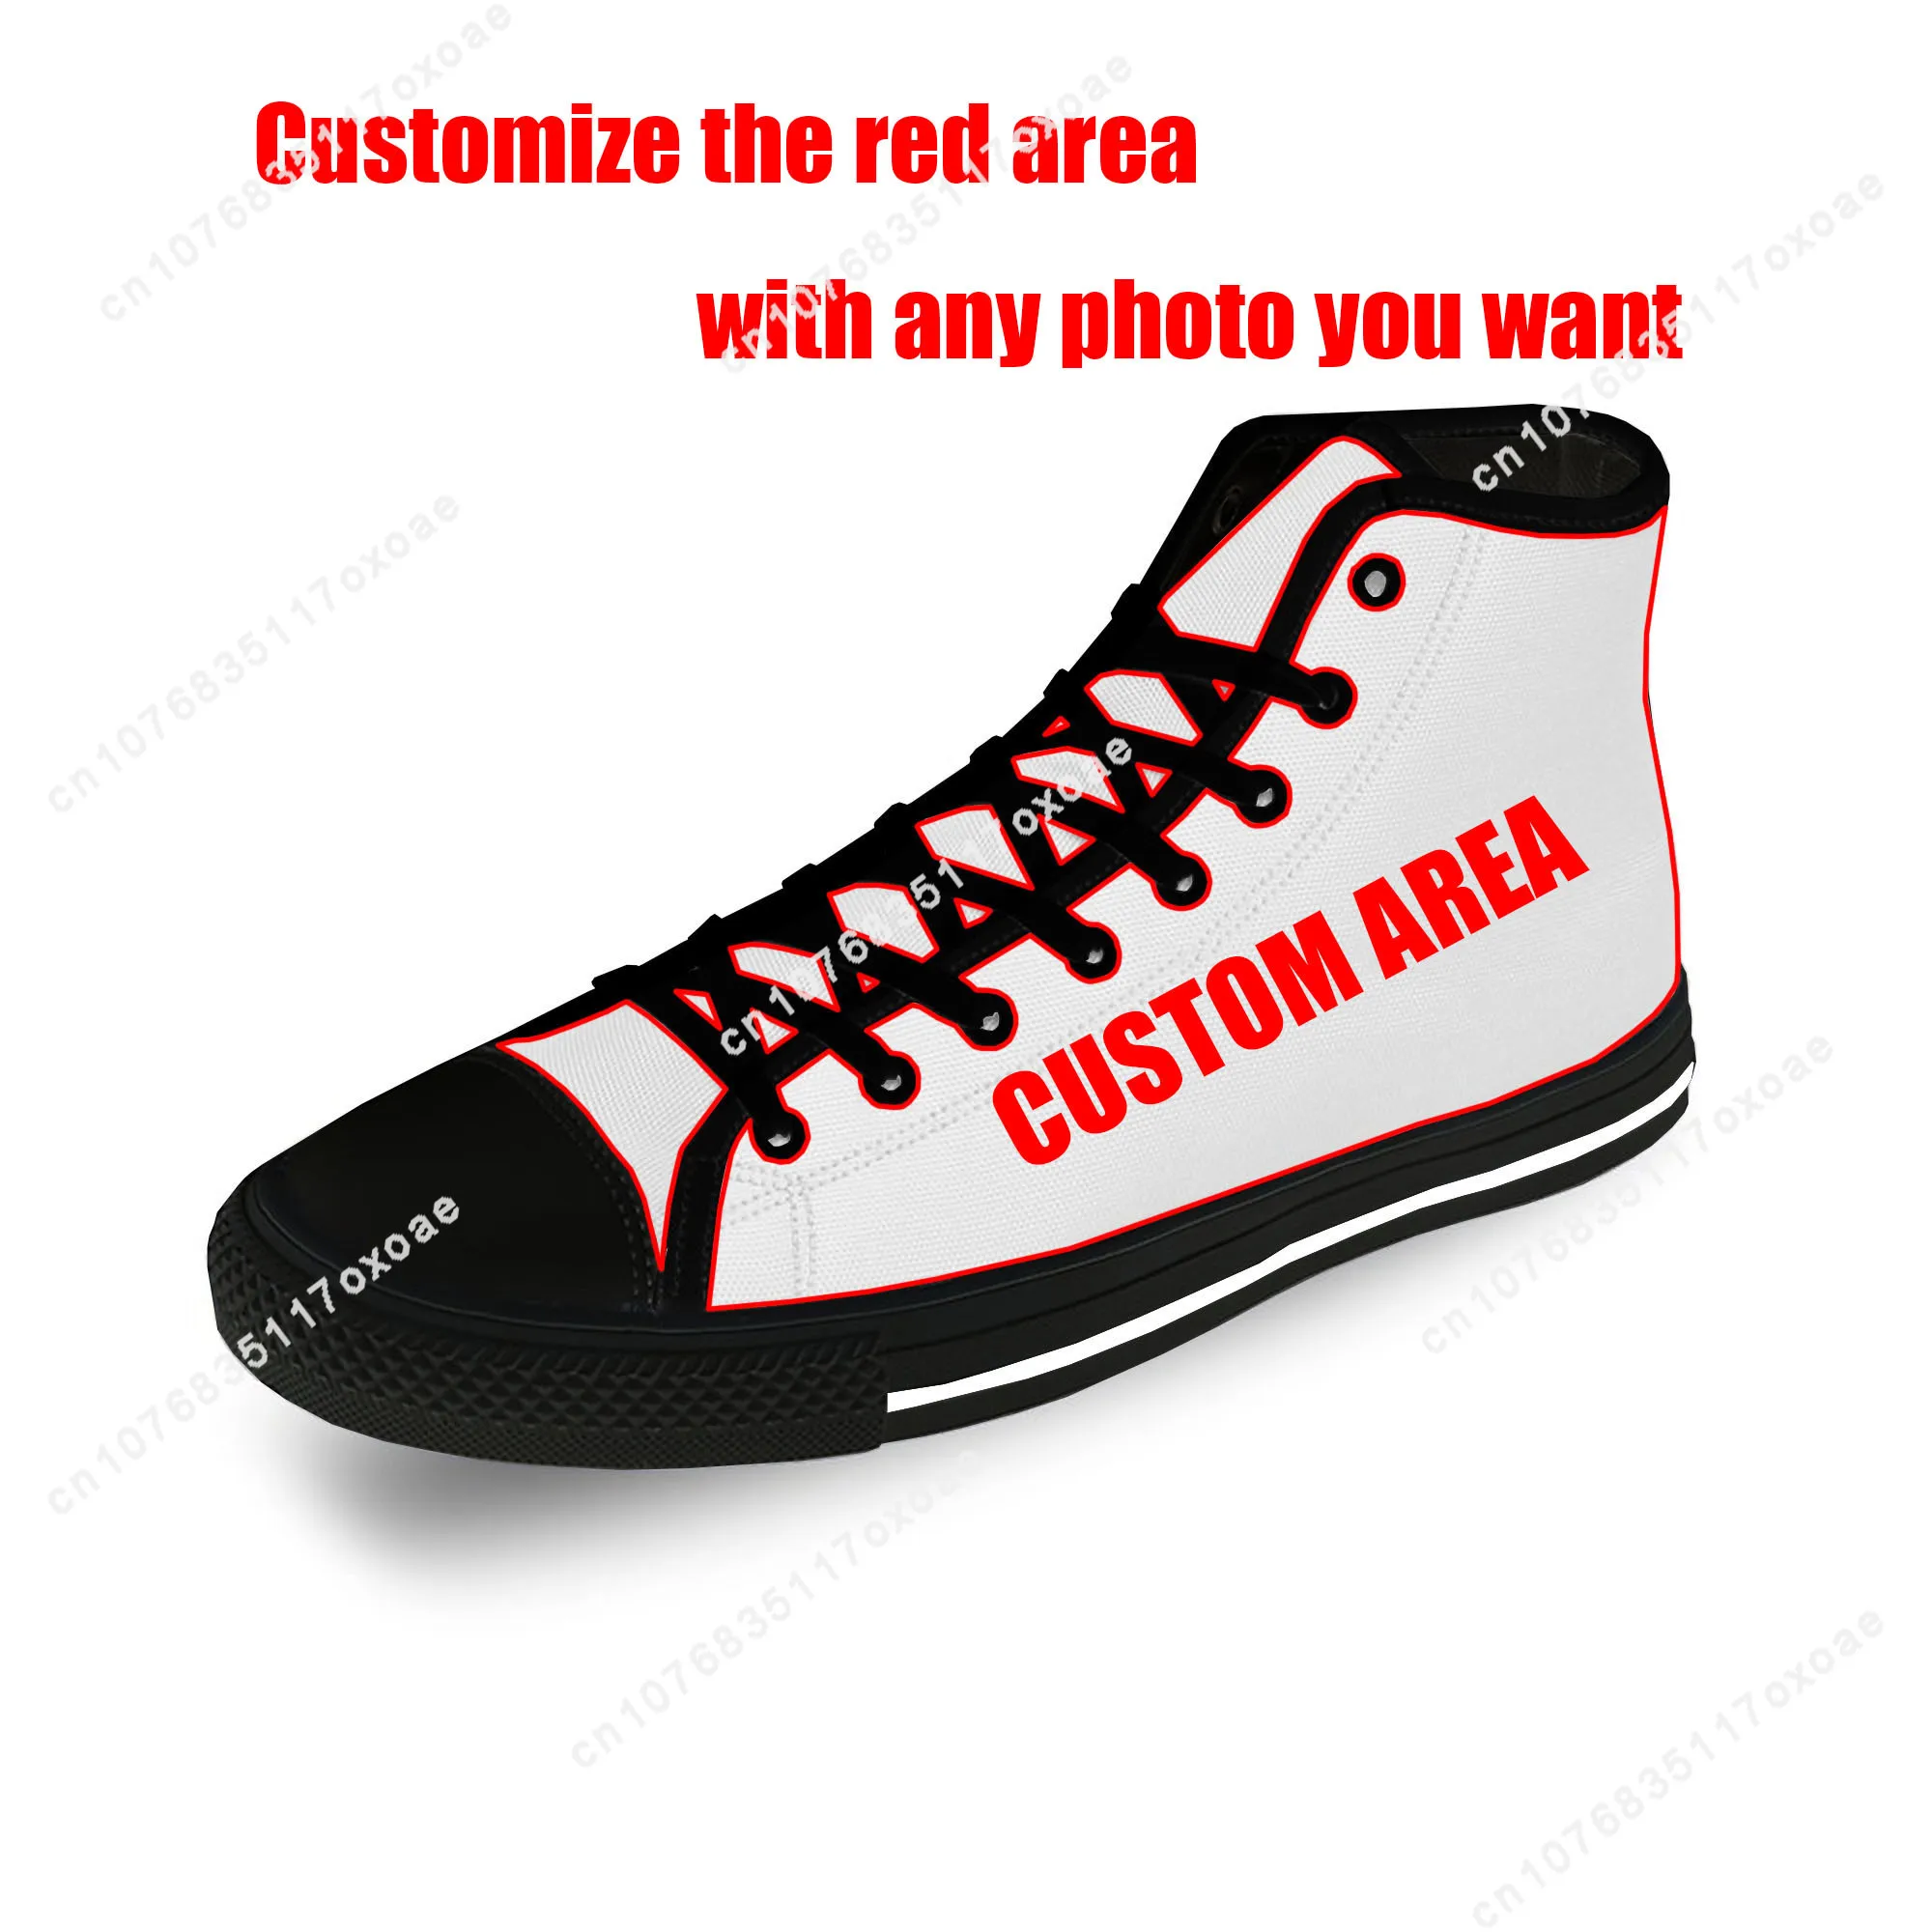 Indian Vintage Motorcycles High Top Sneakers Mens Womens Teenager High Quality Canvas Sneaker couple Casual Shoe Customize Shoes